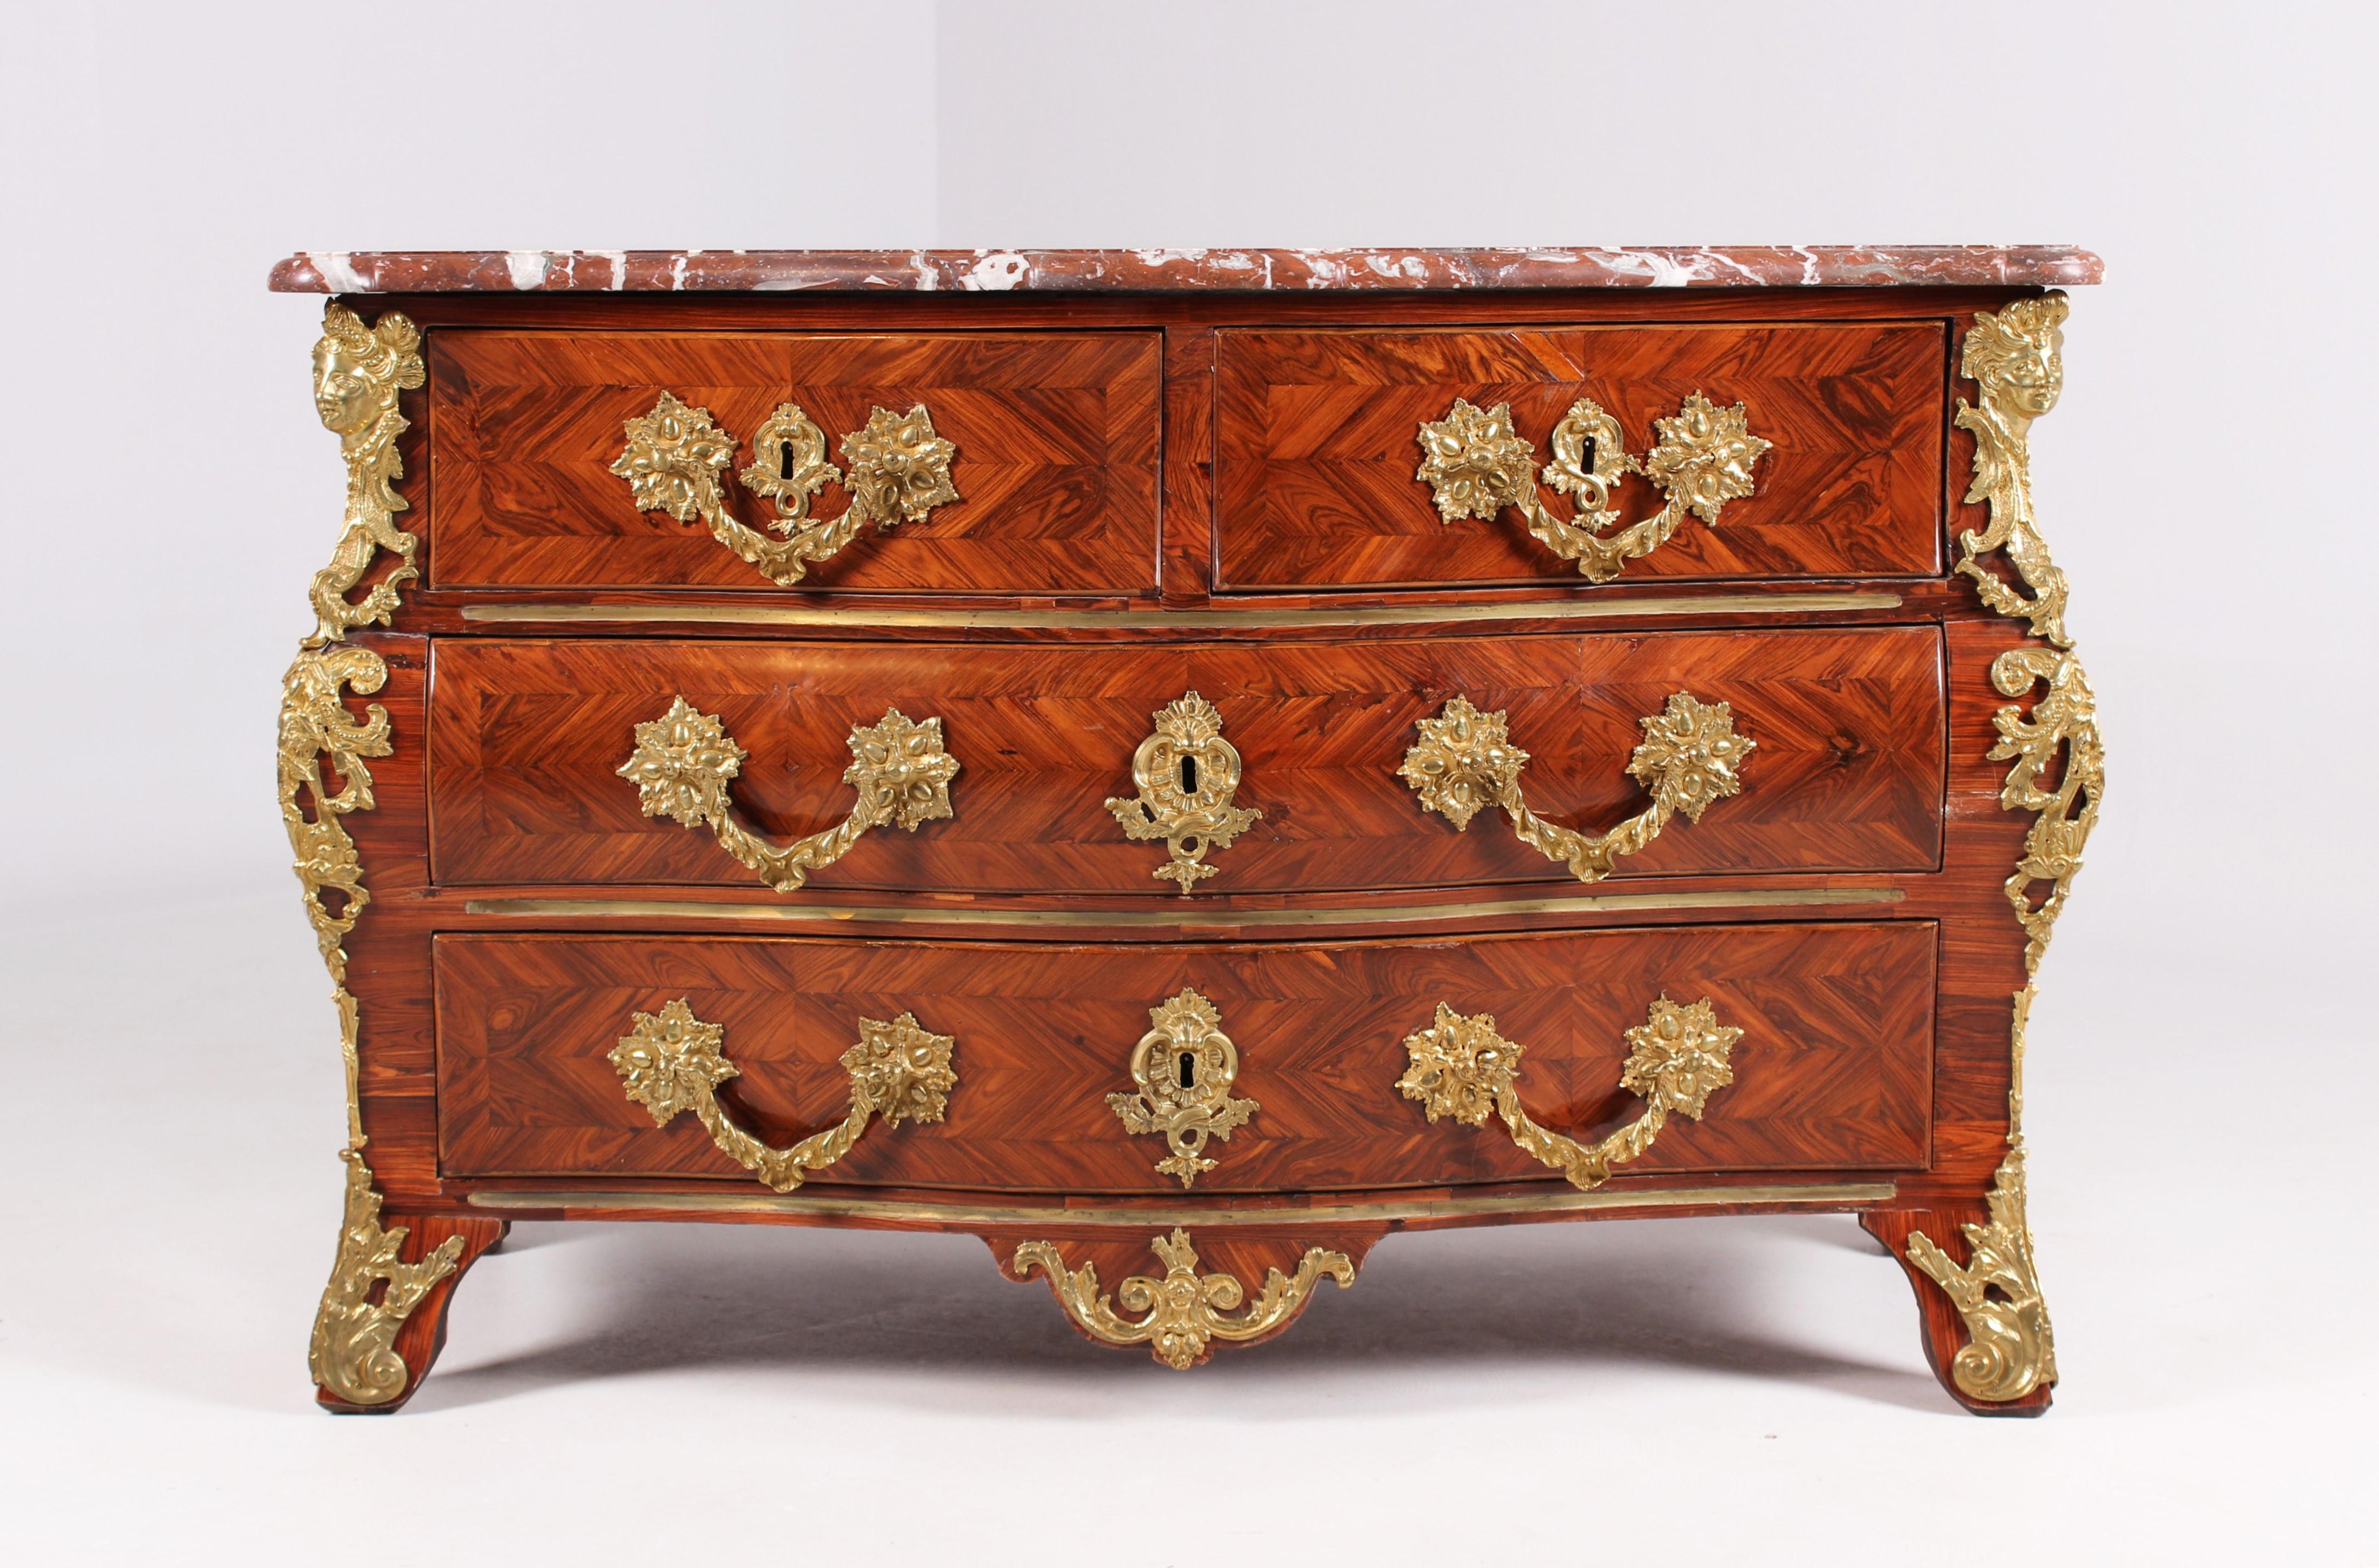 Louis XV chest of drawers with fire-gilt fittings

France (Paris)
Rosewood
Louis XV around 1730

Dimensions: H x W x D: 85 x 137 x 66 cm

Description:
Early Louis XV commode, so-called commode en tombeau, with heavy bronze mounts.

The corpus with